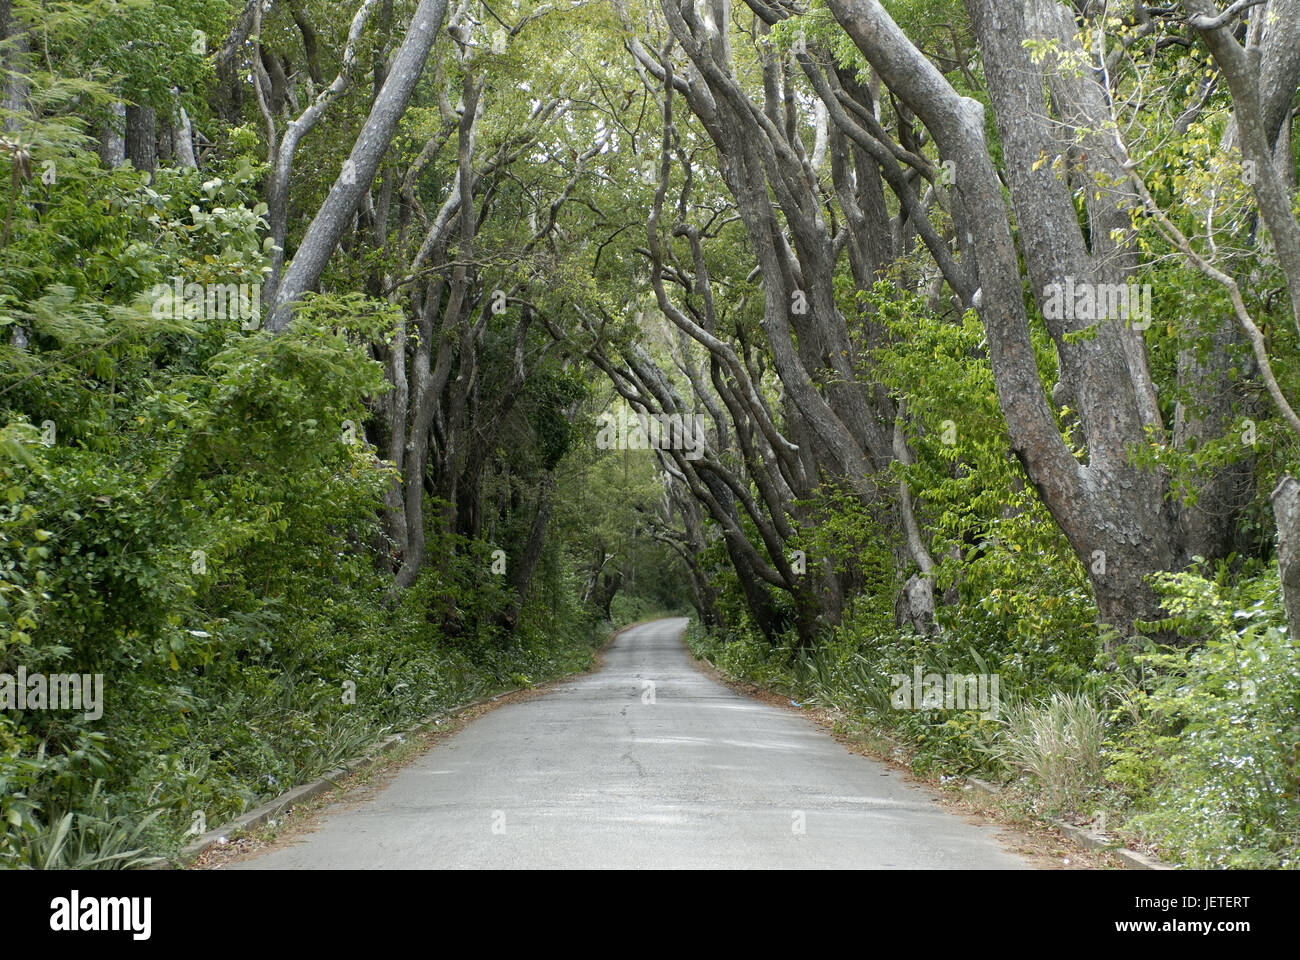 The small Antilles, Barbados, wood, route, the Caribbean, island, Caribbean island, mahogany trees, fine woods, tropical woodworks, shrubs, vegetation, street, deserted, loneliness, rest, silence, destination, tourism, avenue, Stock Photo